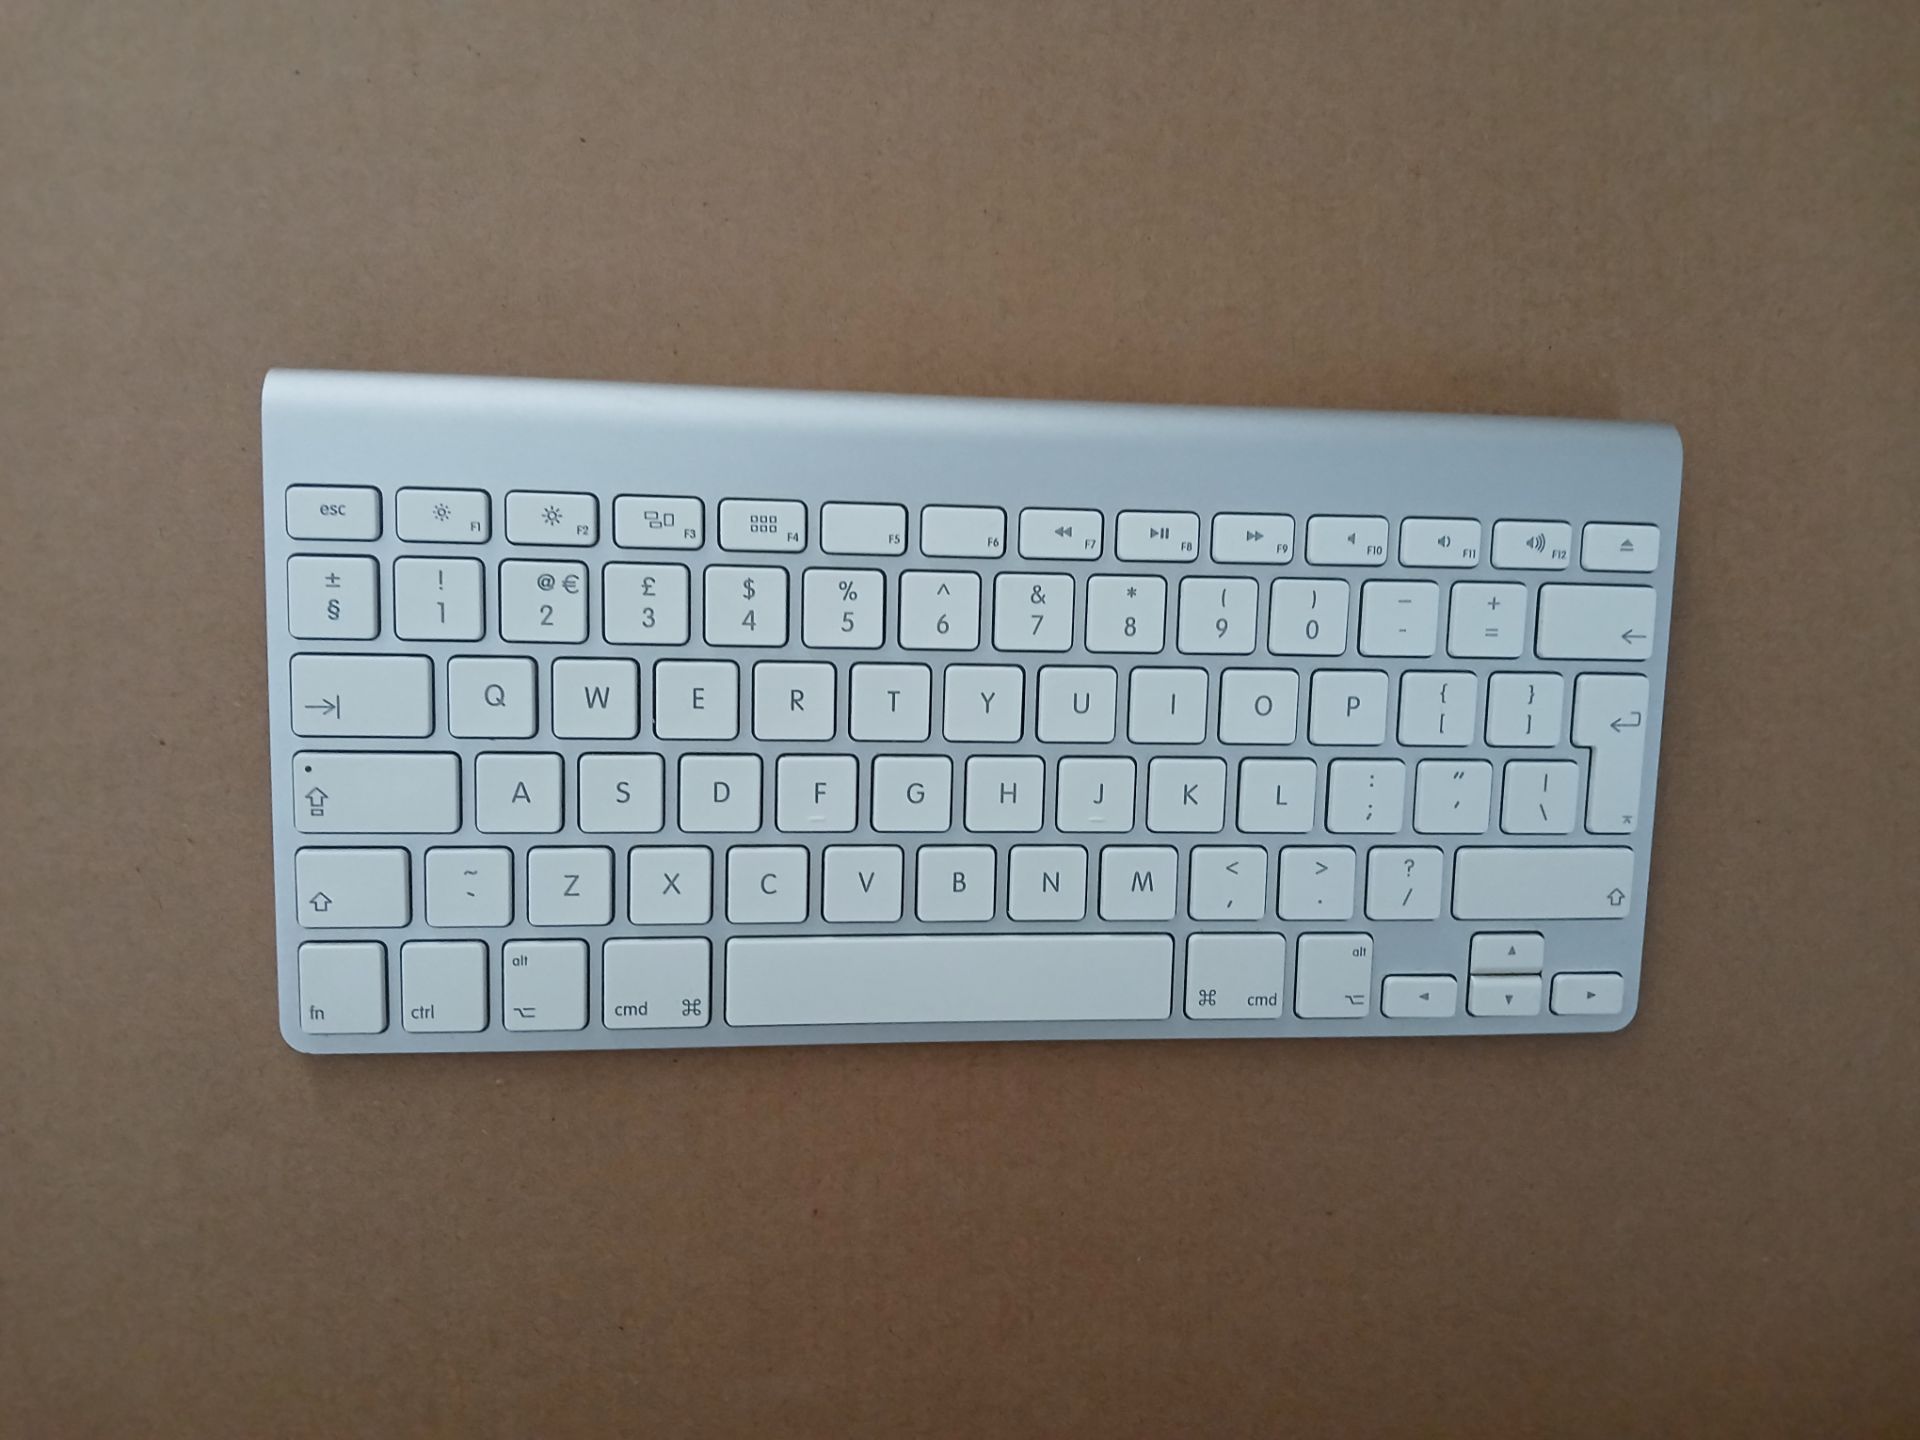 Apple iMac (Retina 5K, 27”, Mid 2015), Serial Number DGKQ306WFY13, with keyboard (No Mouse or - Image 11 of 14